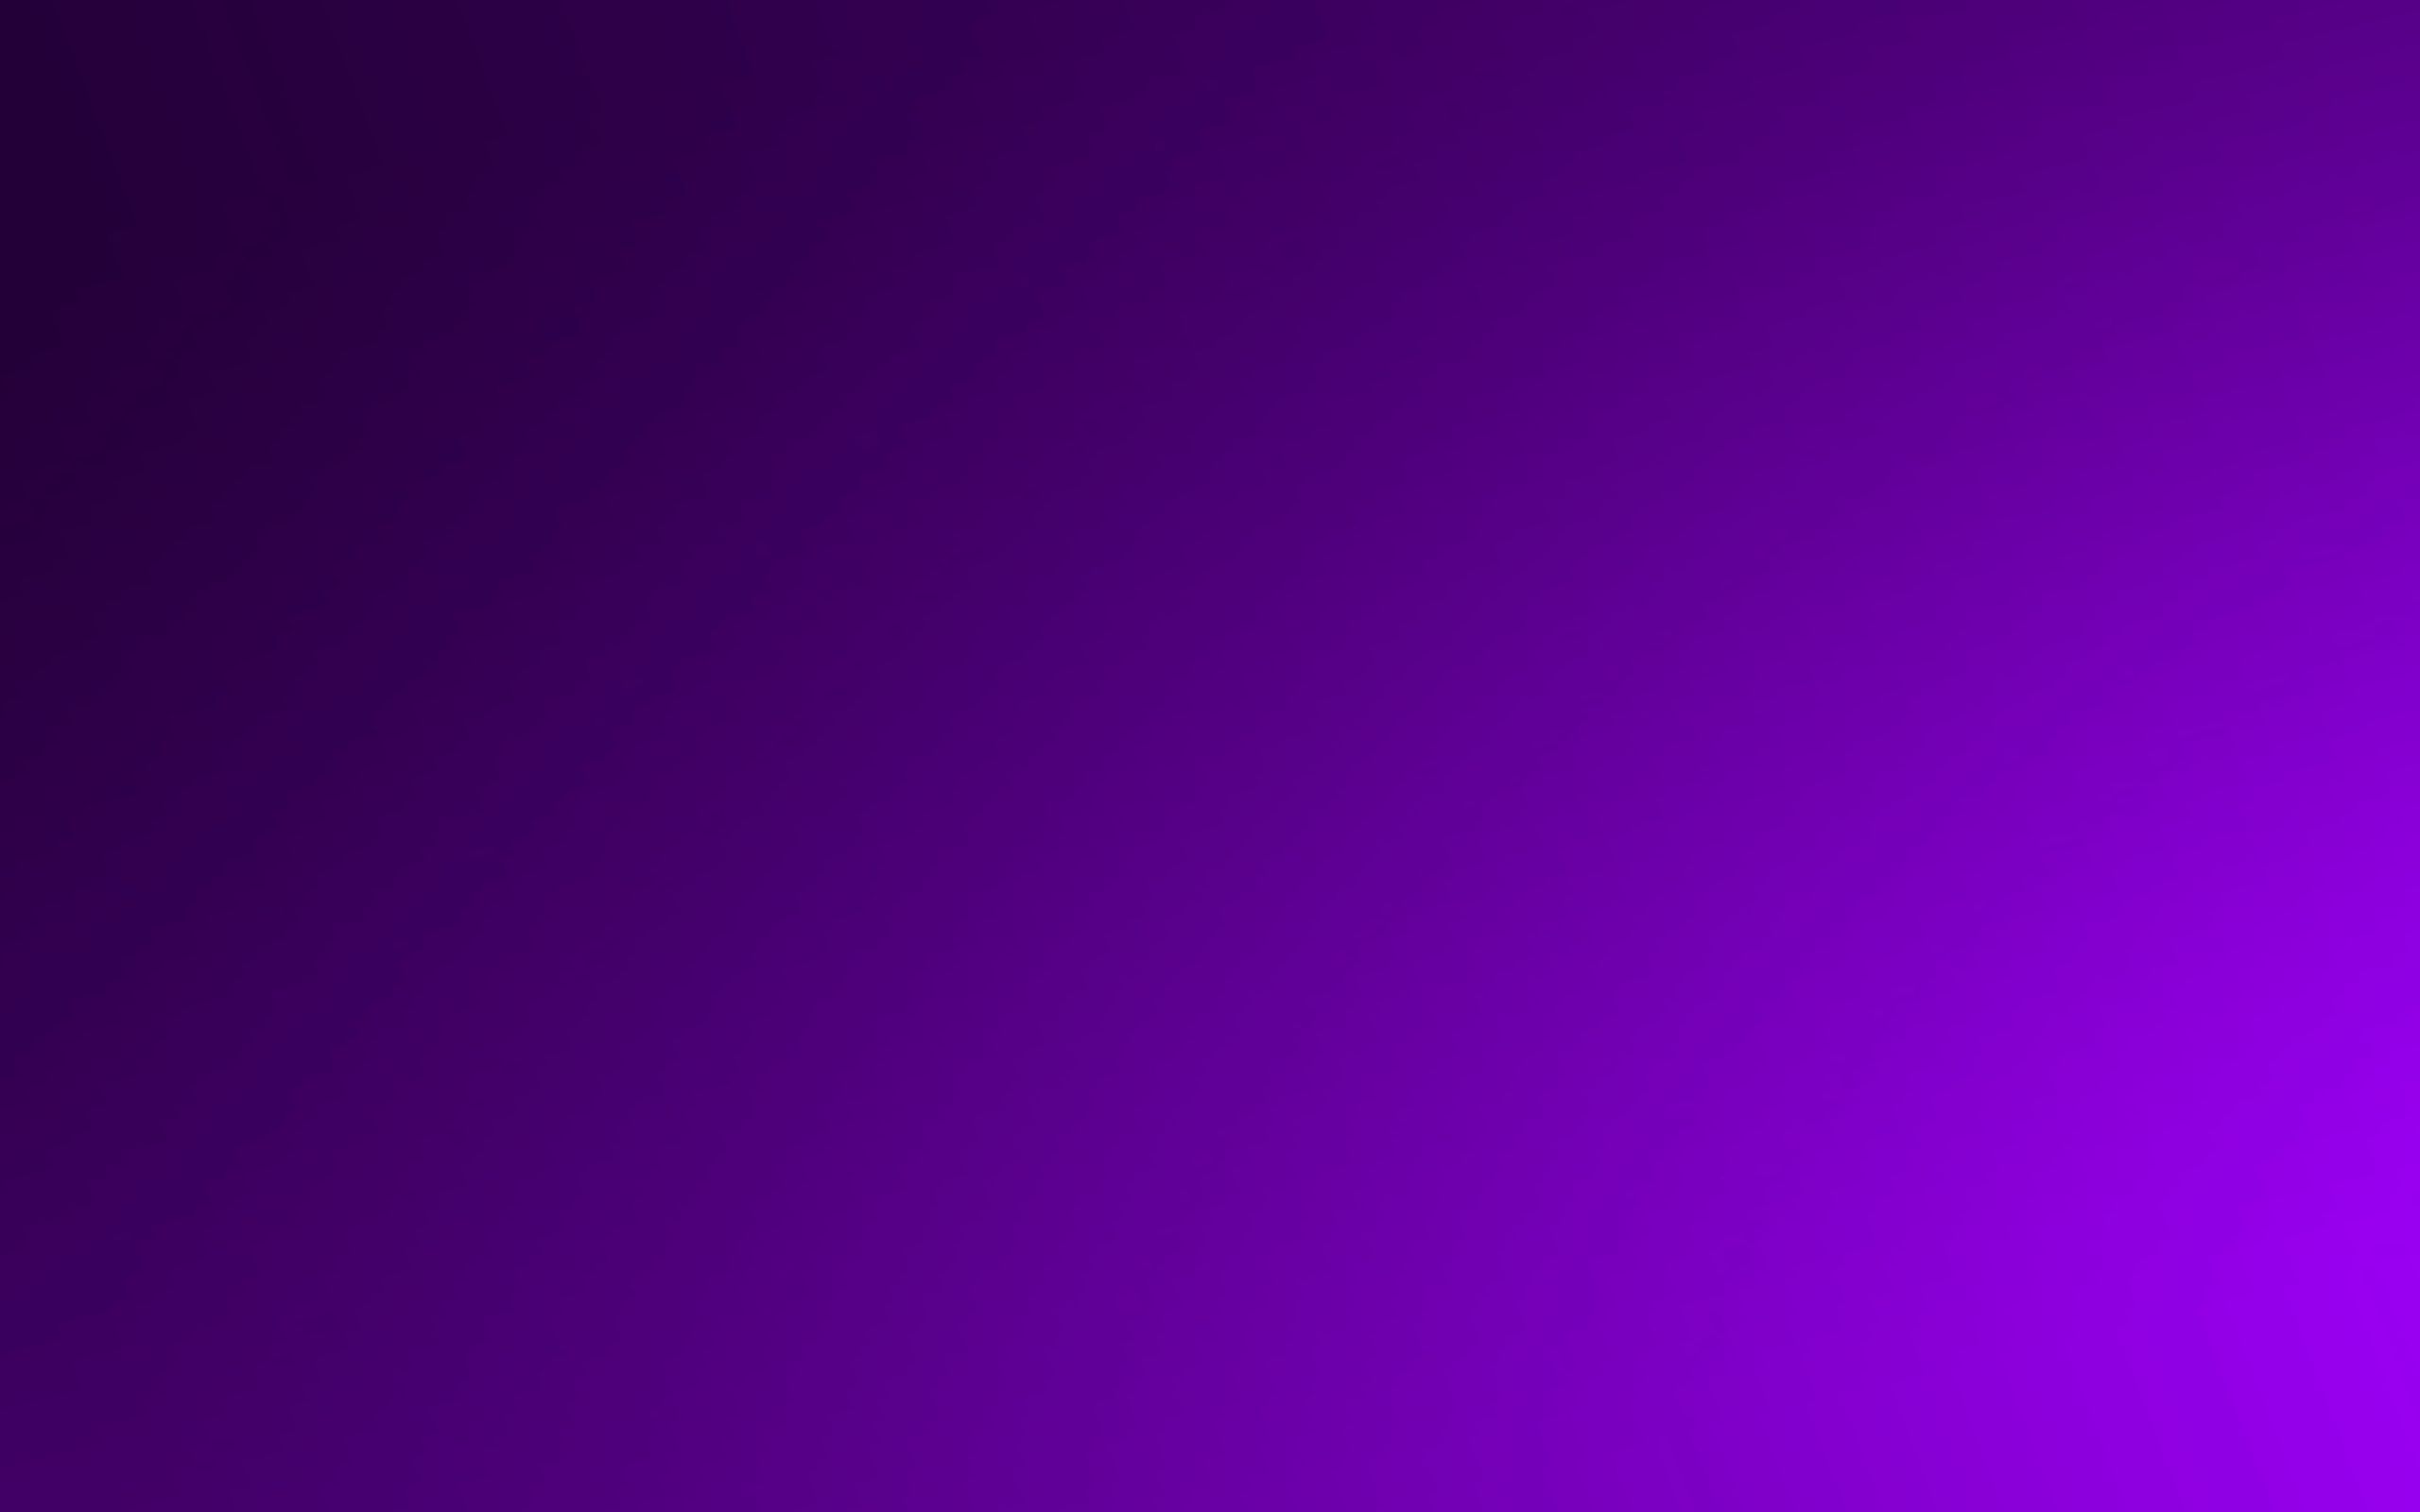 violet, solid, purple, background, abstract